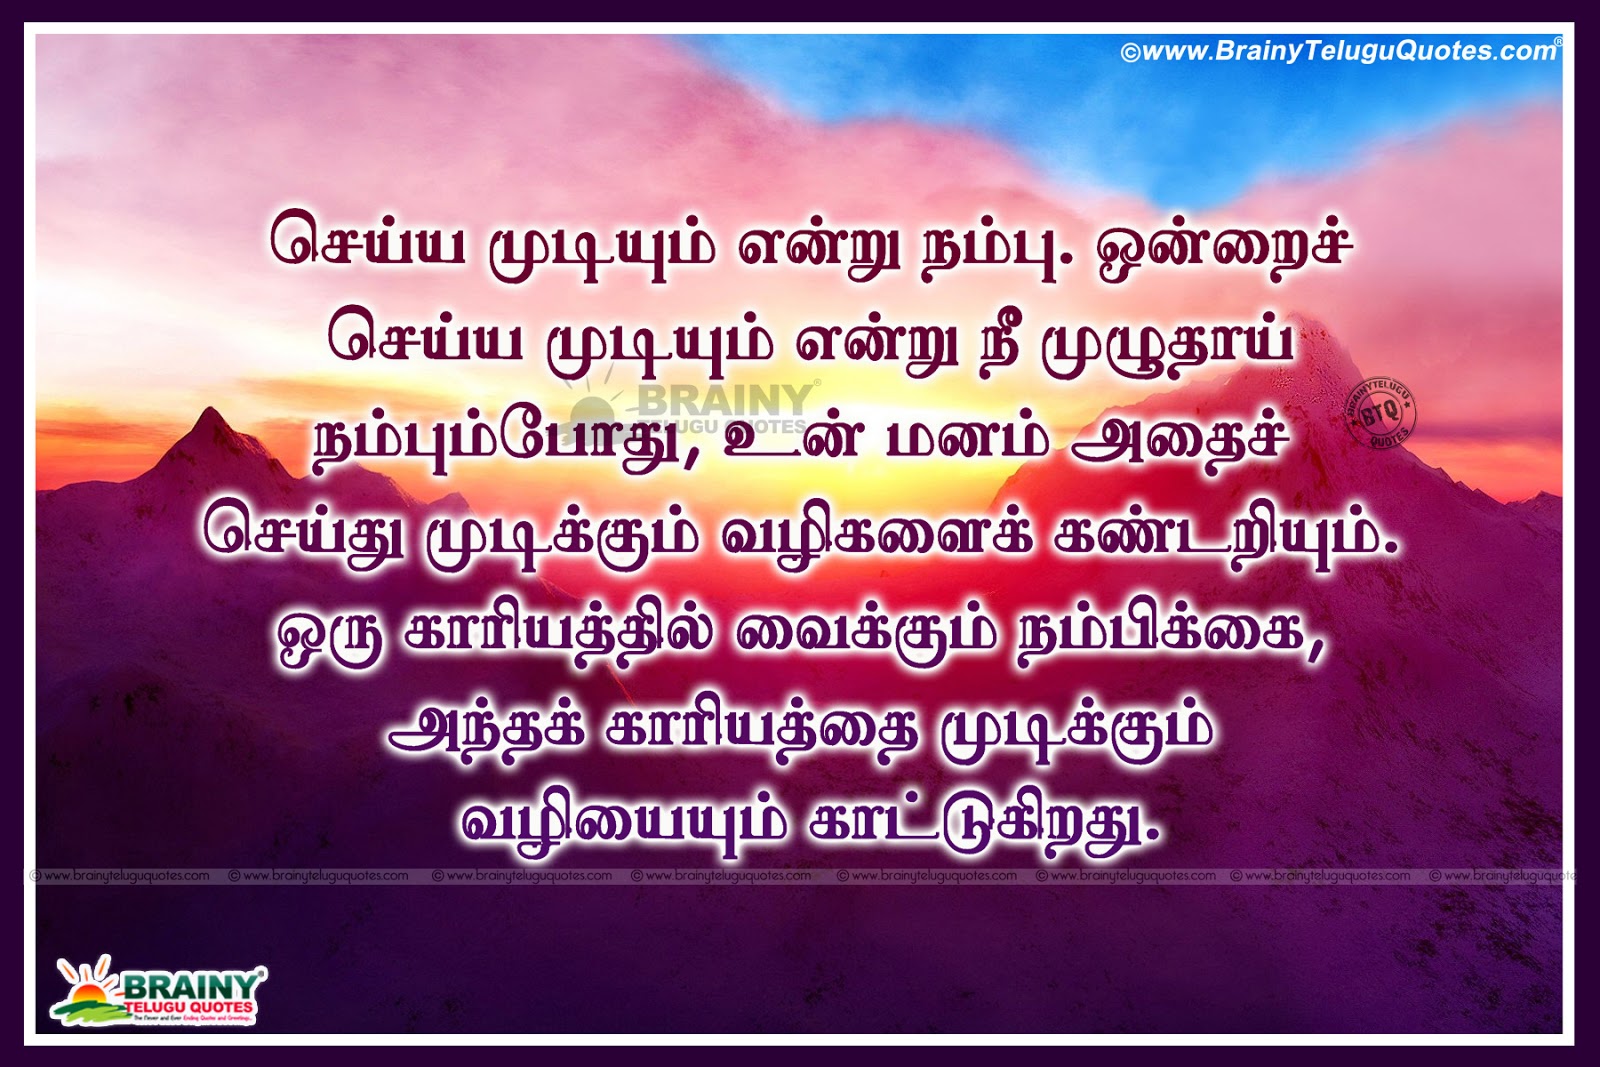 Nice Inspiring Tamil Quotations We have many opportunities Quotations in Tamil language Best Tamil